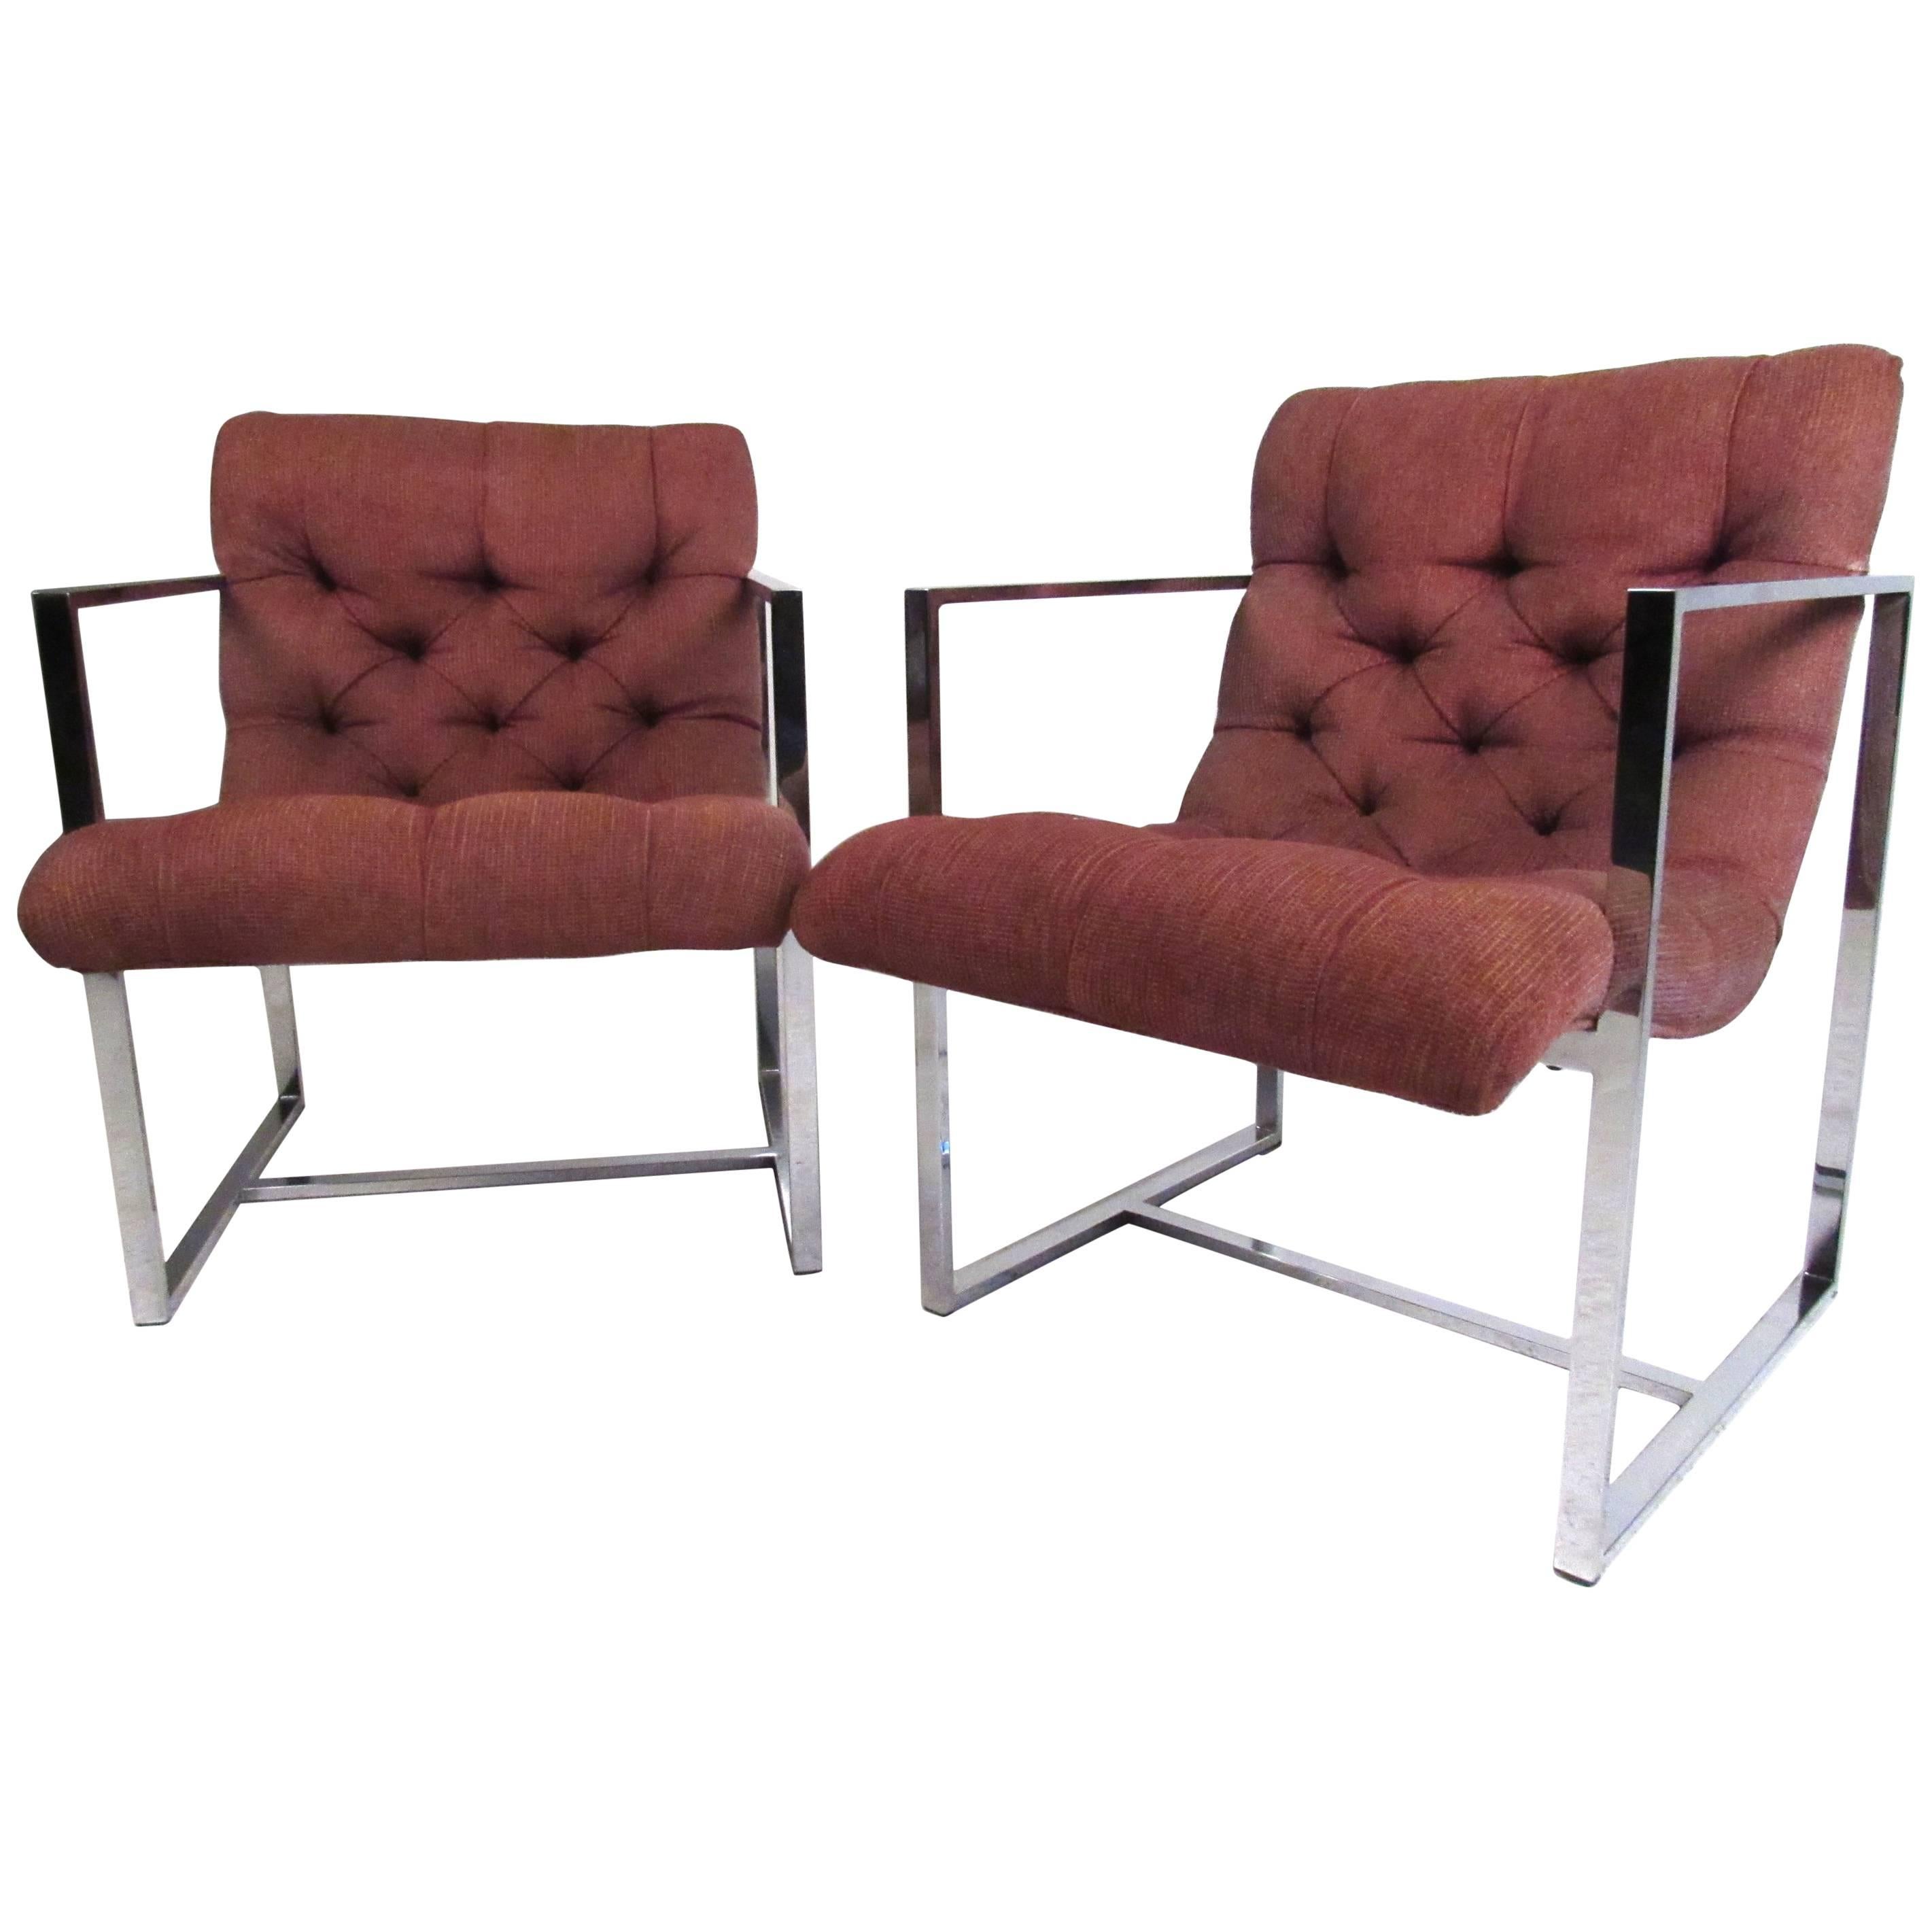 Pair of Mid-Century Milo Baughman Style Lounge Chairs